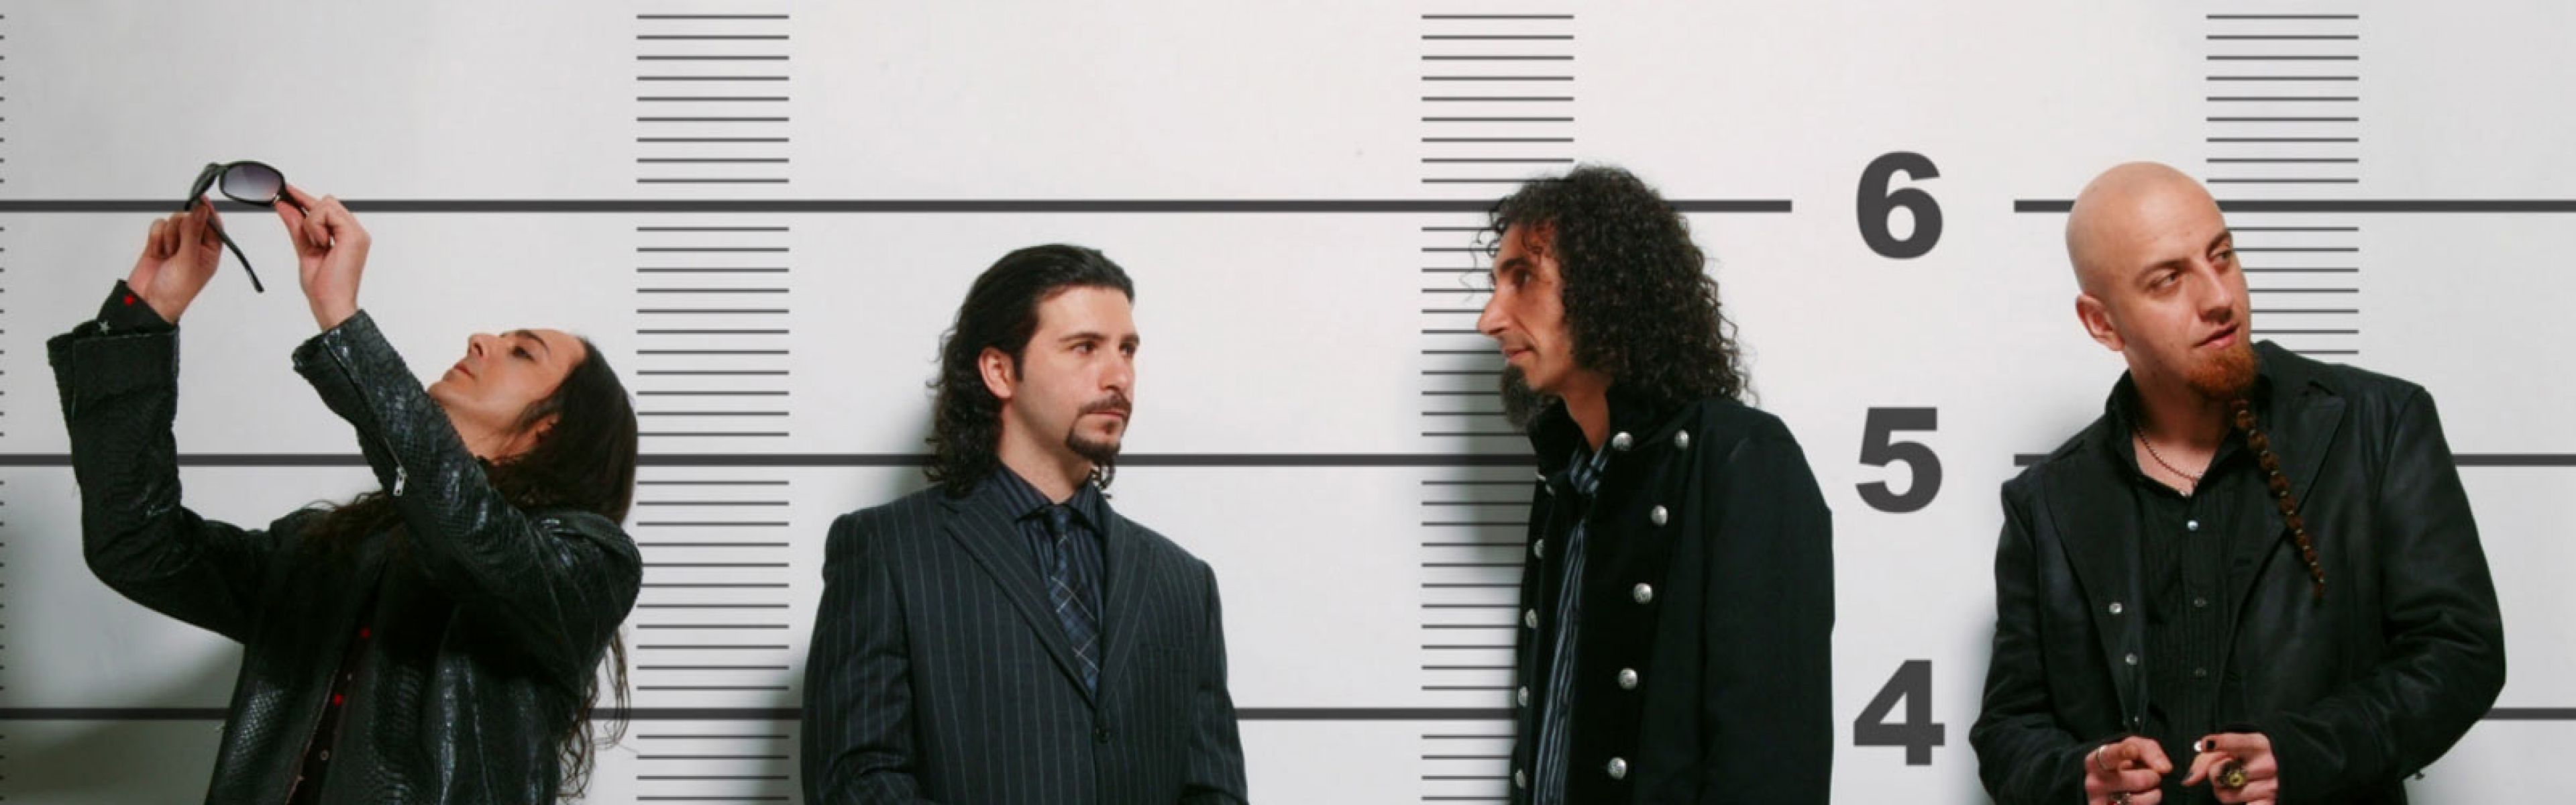 Download Wallpaper 3840x1200 System of a down, Band, Members ...